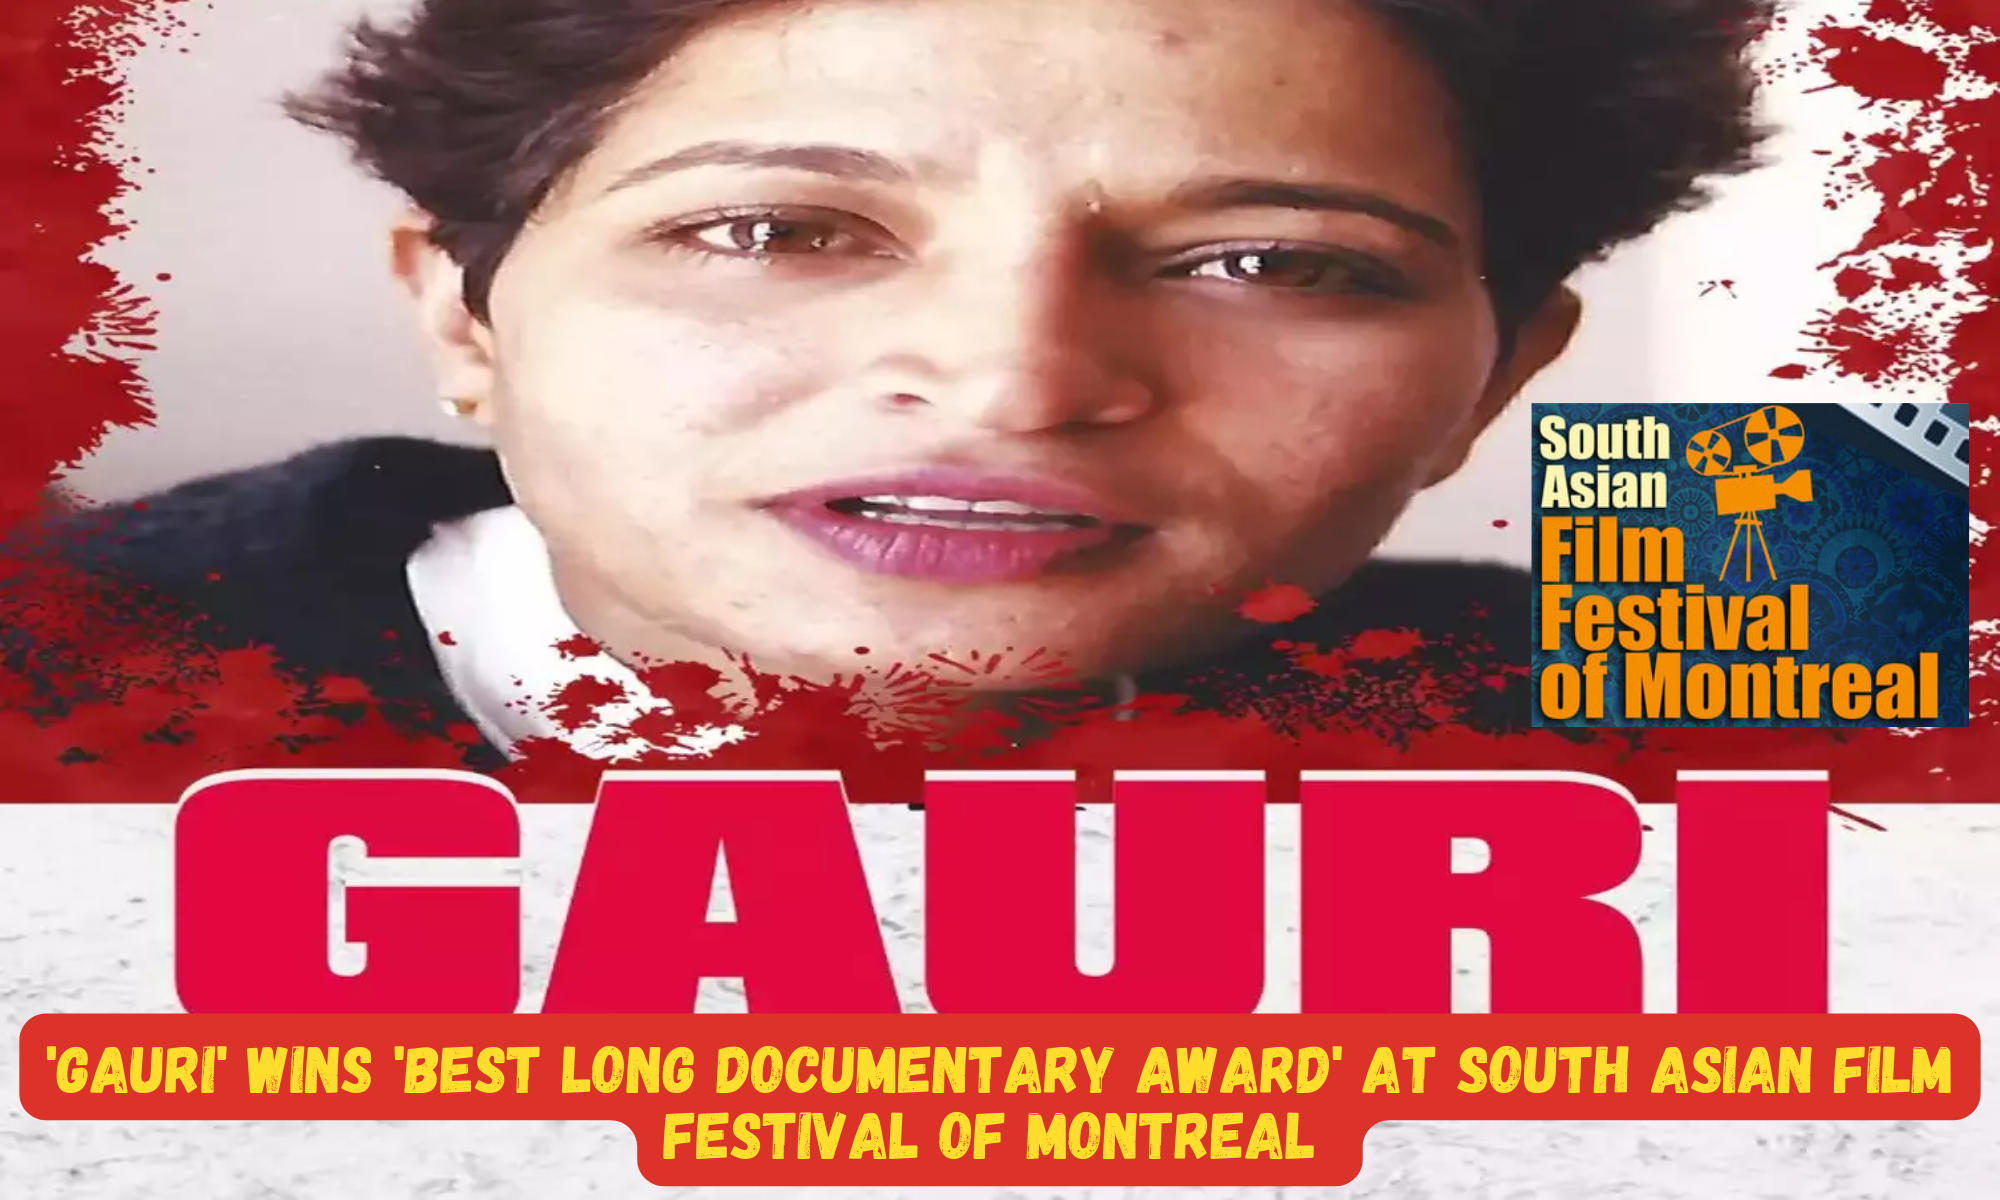 'Gauri' wins 'Best Long Documentary Award' at South Asian Film Festival of Montreal